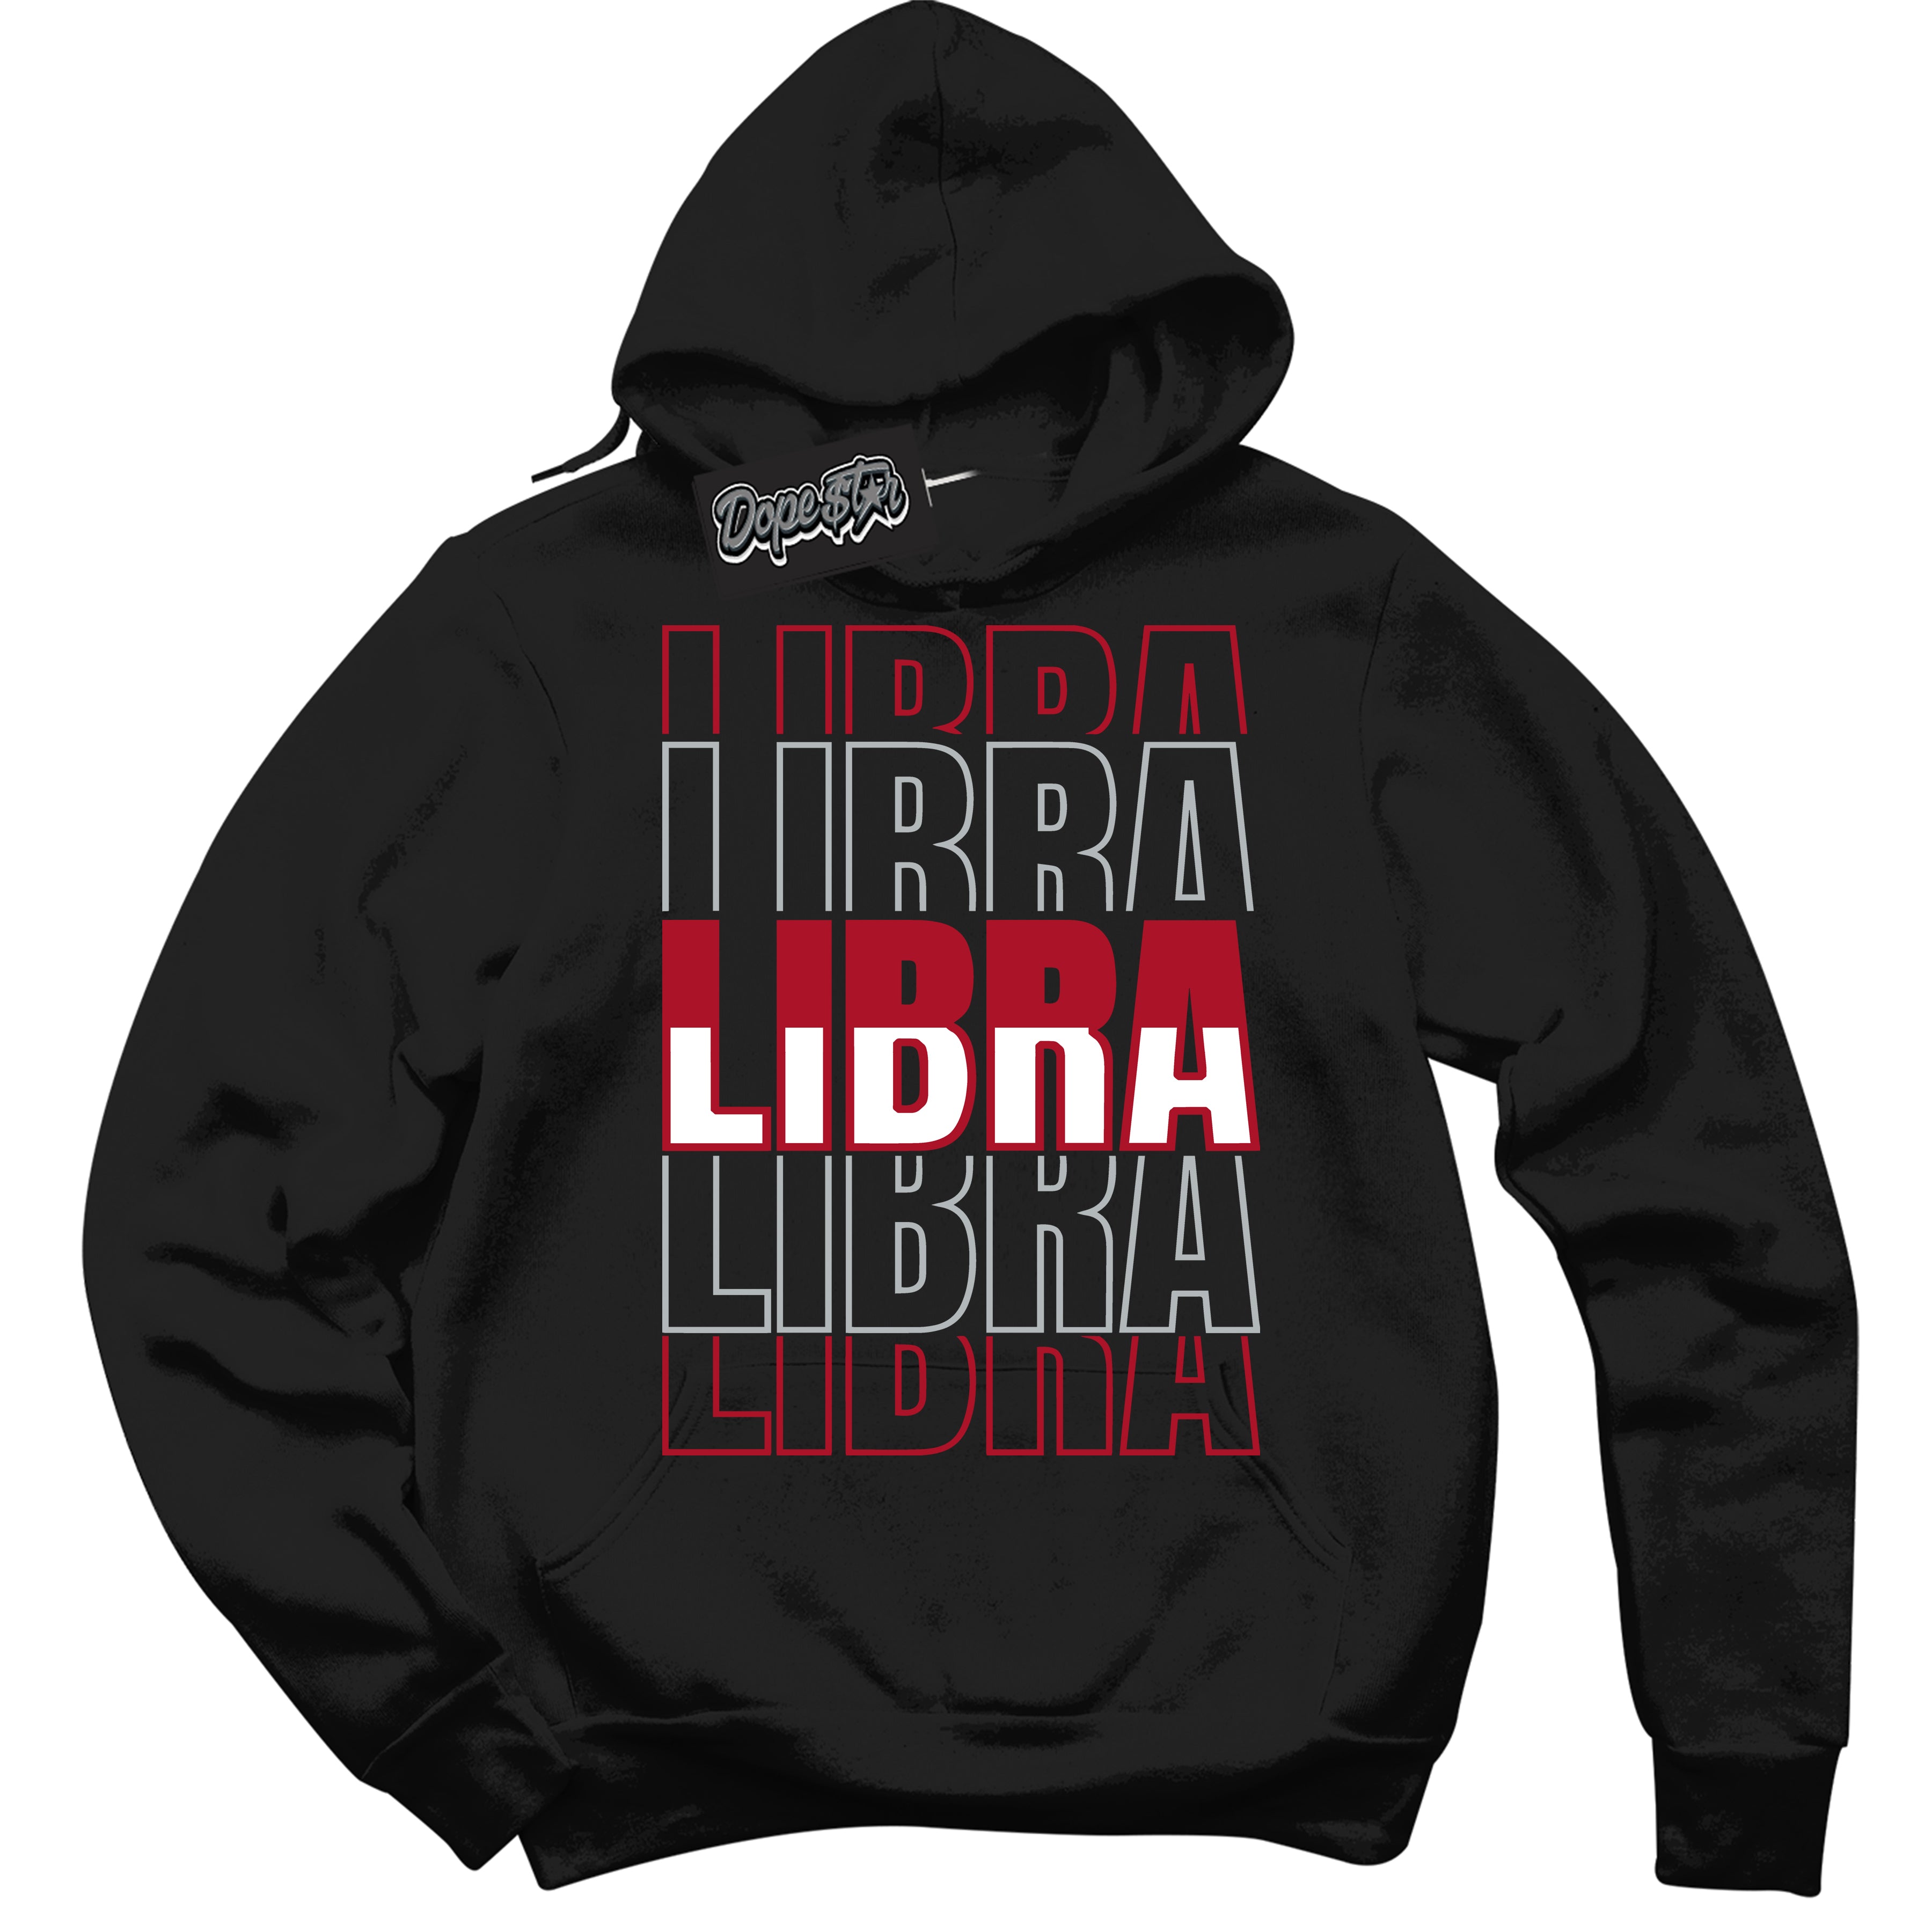 Cool Black Hoodie with “ Libra ”  design that Perfectly Matches  Reverse Ultraman Sneakers.